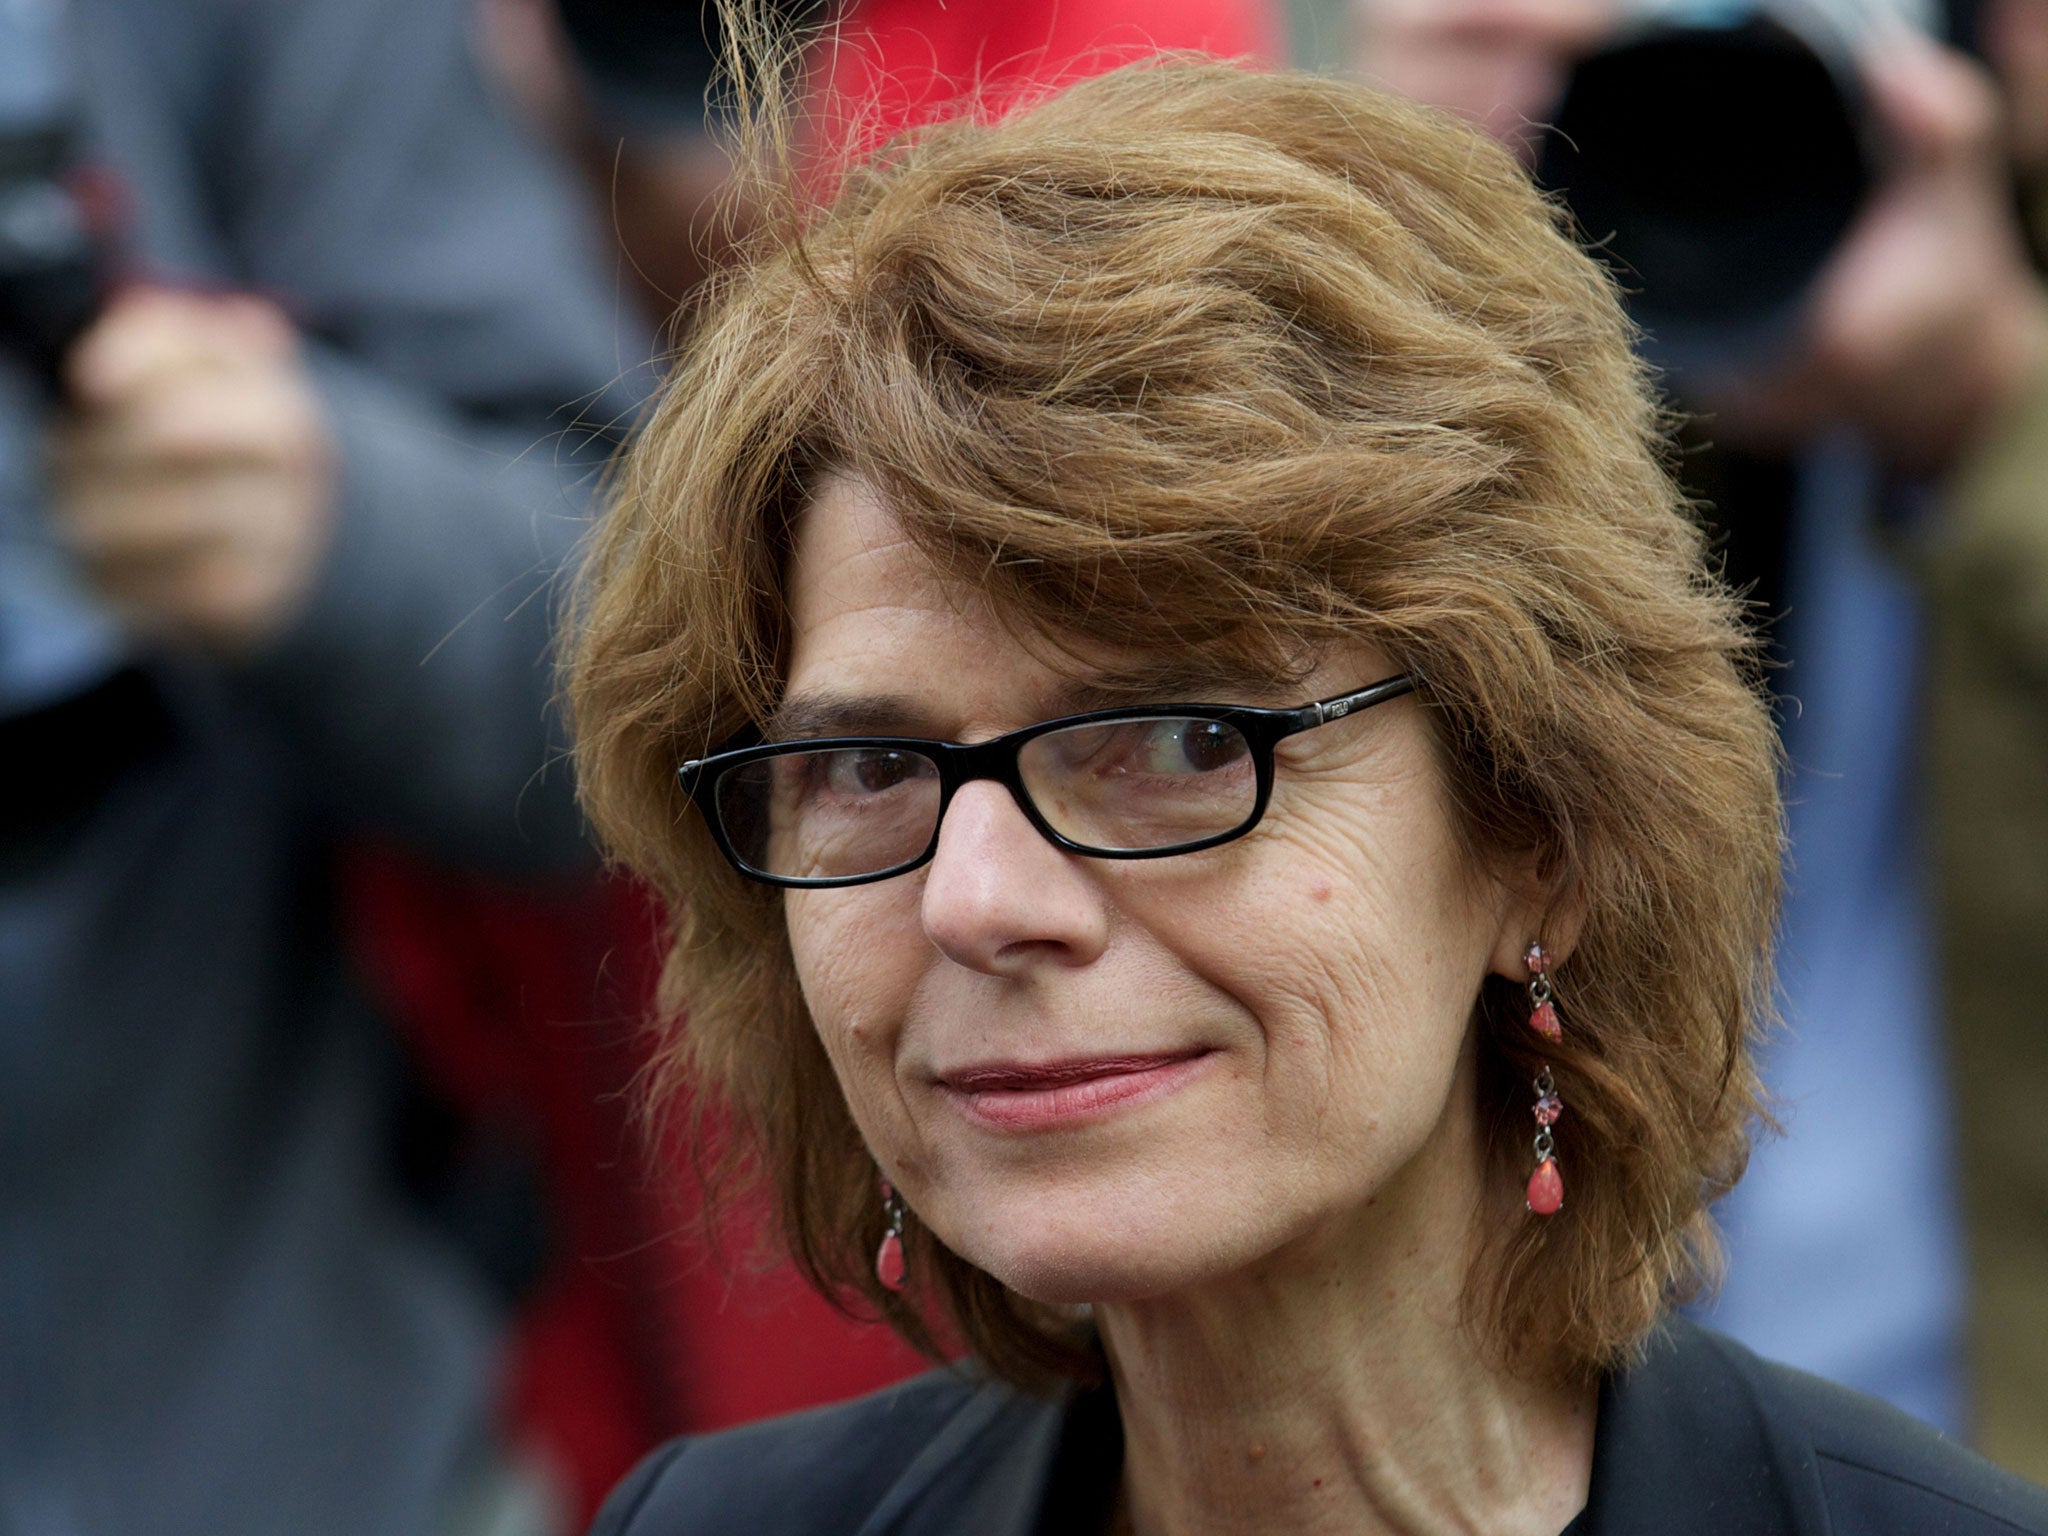 Vicky Pryce said she did not blame the journalists involved in her downfall